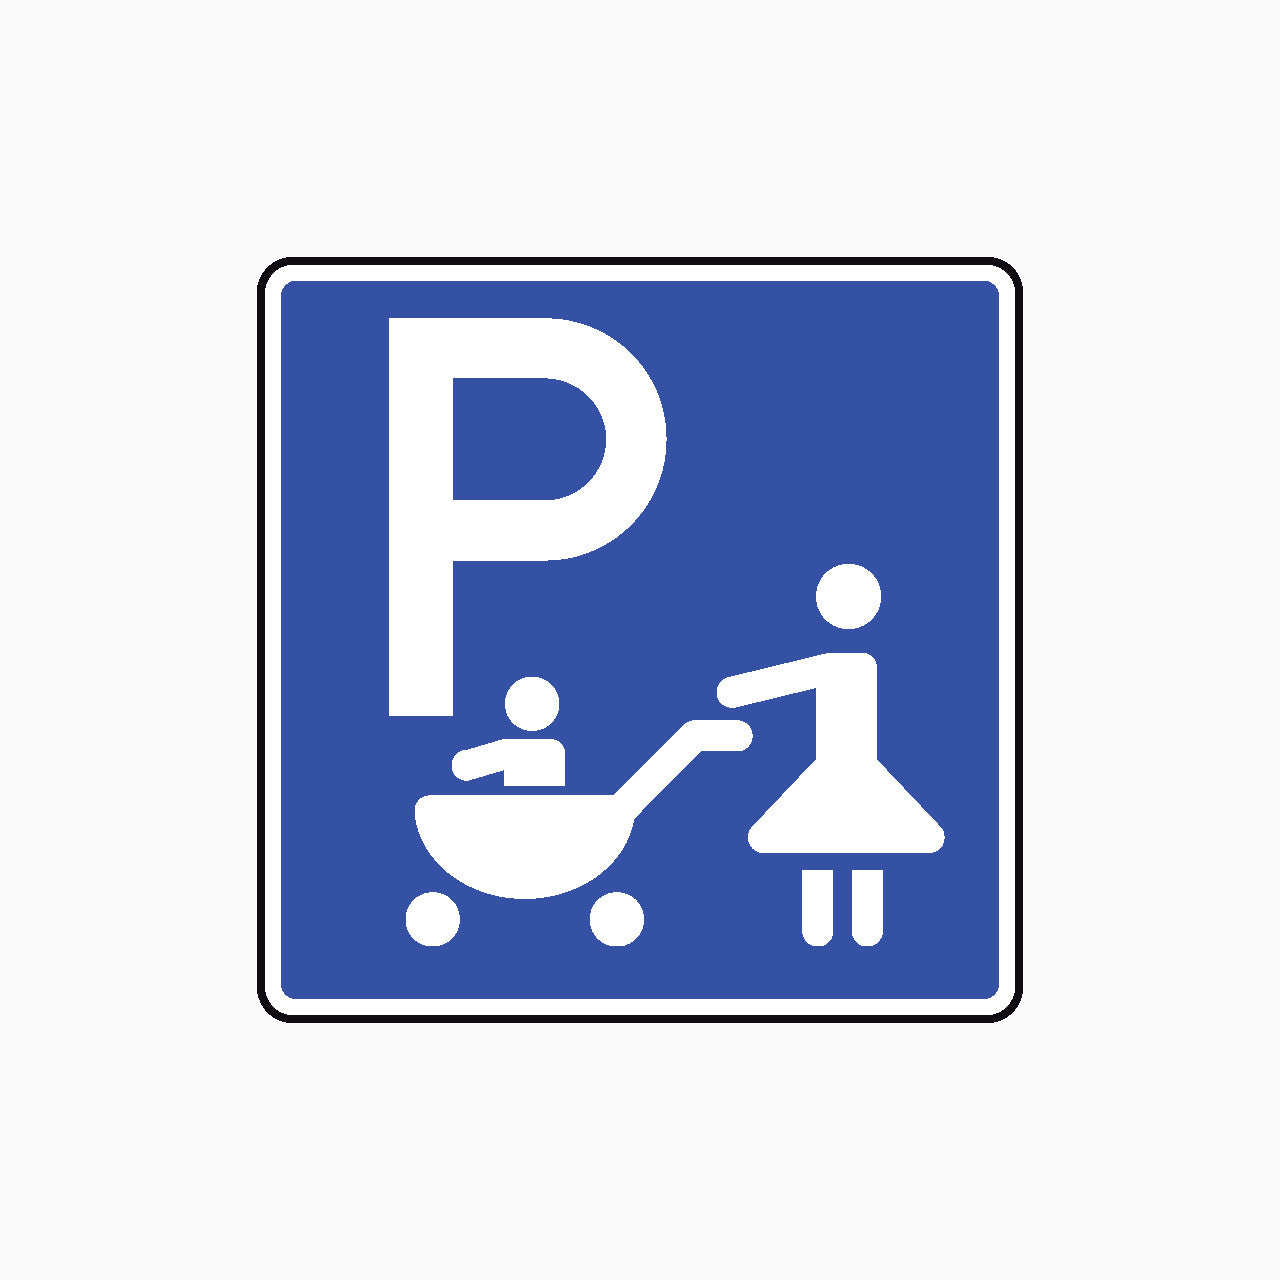 PARKING PARENTS WITH PRAMS SIGN